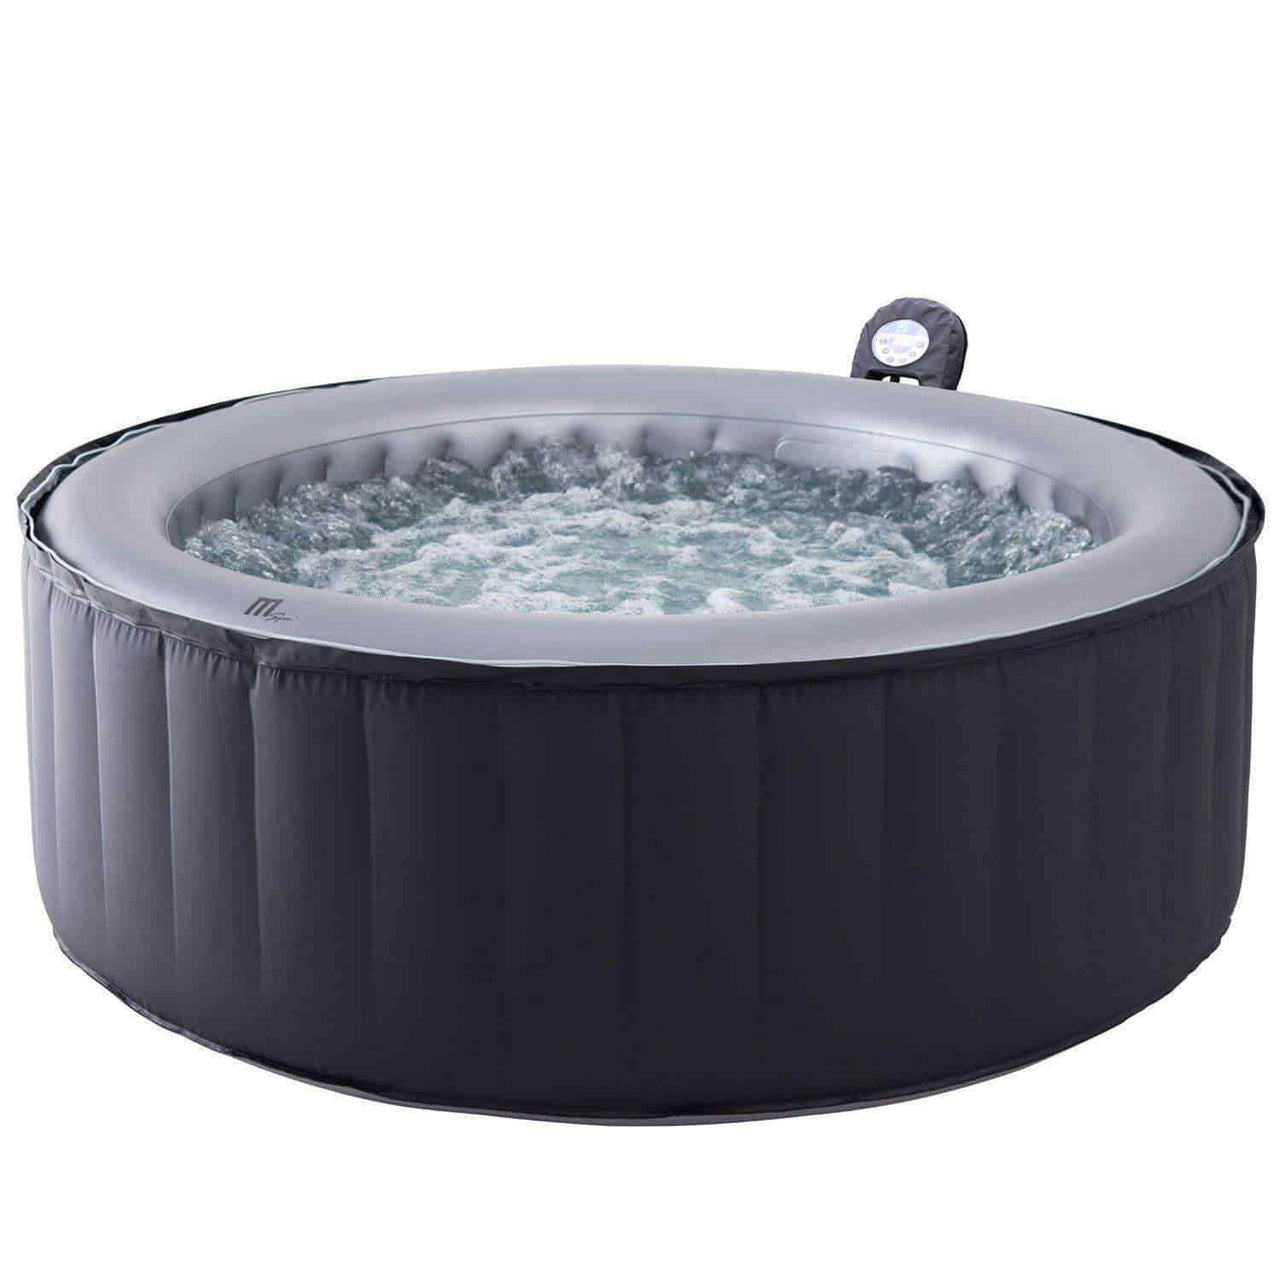 MSPA Silver Cloud Portable Luxury Hot Tubs with Jets - Senior.com Hot Tubs & Jacuzzis